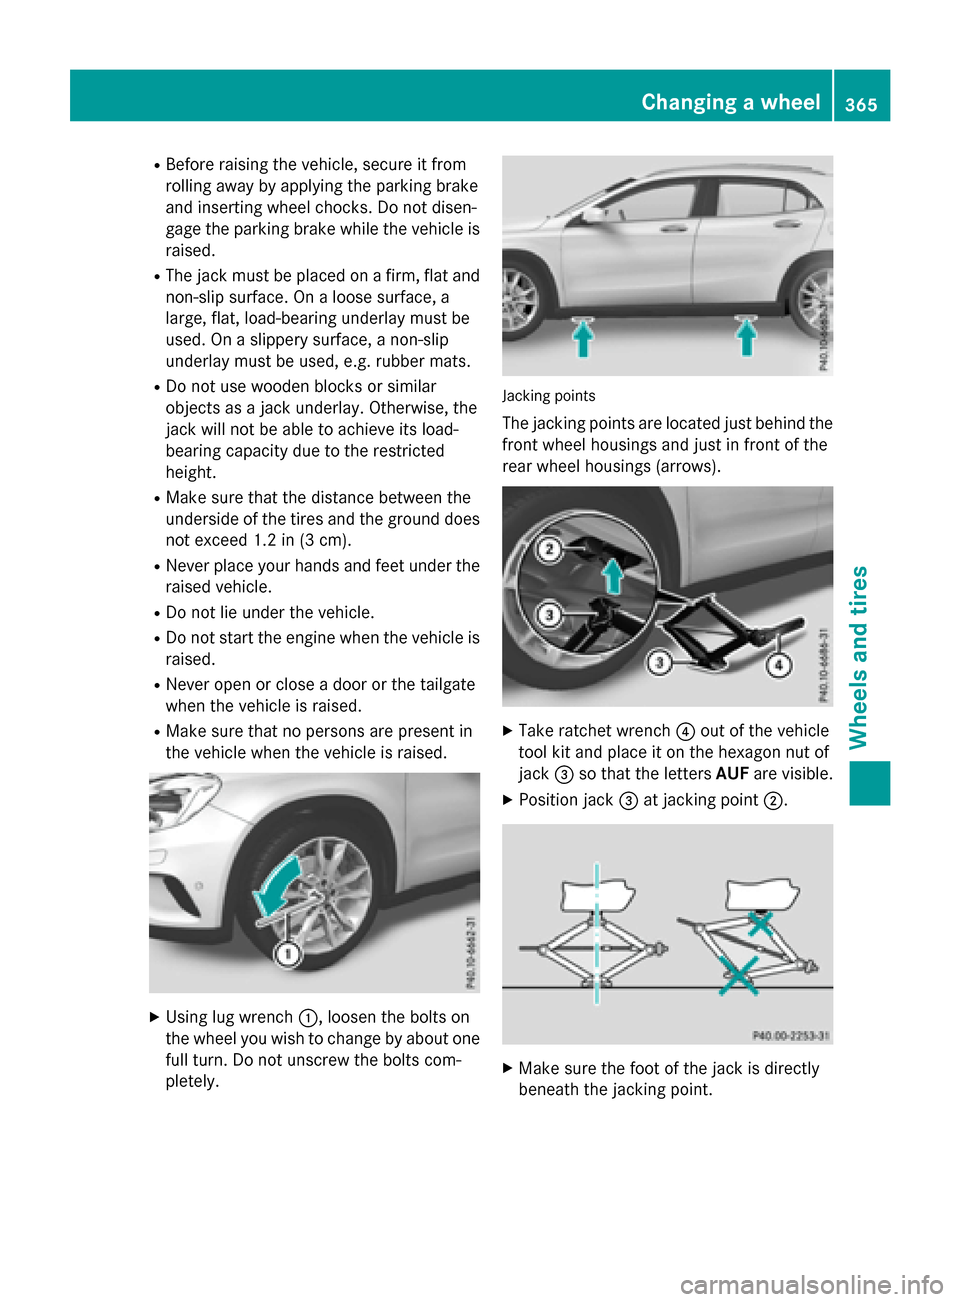 MERCEDES-BENZ GLA-Class 2017 X156 Owners Guide RBefore raising the vehicle, secure it from
rolling away by applying the parking brake
and inserting wheel chocks. Do not disen-
gage the parking brake while the vehicle is
raised.
RThe jack must be p